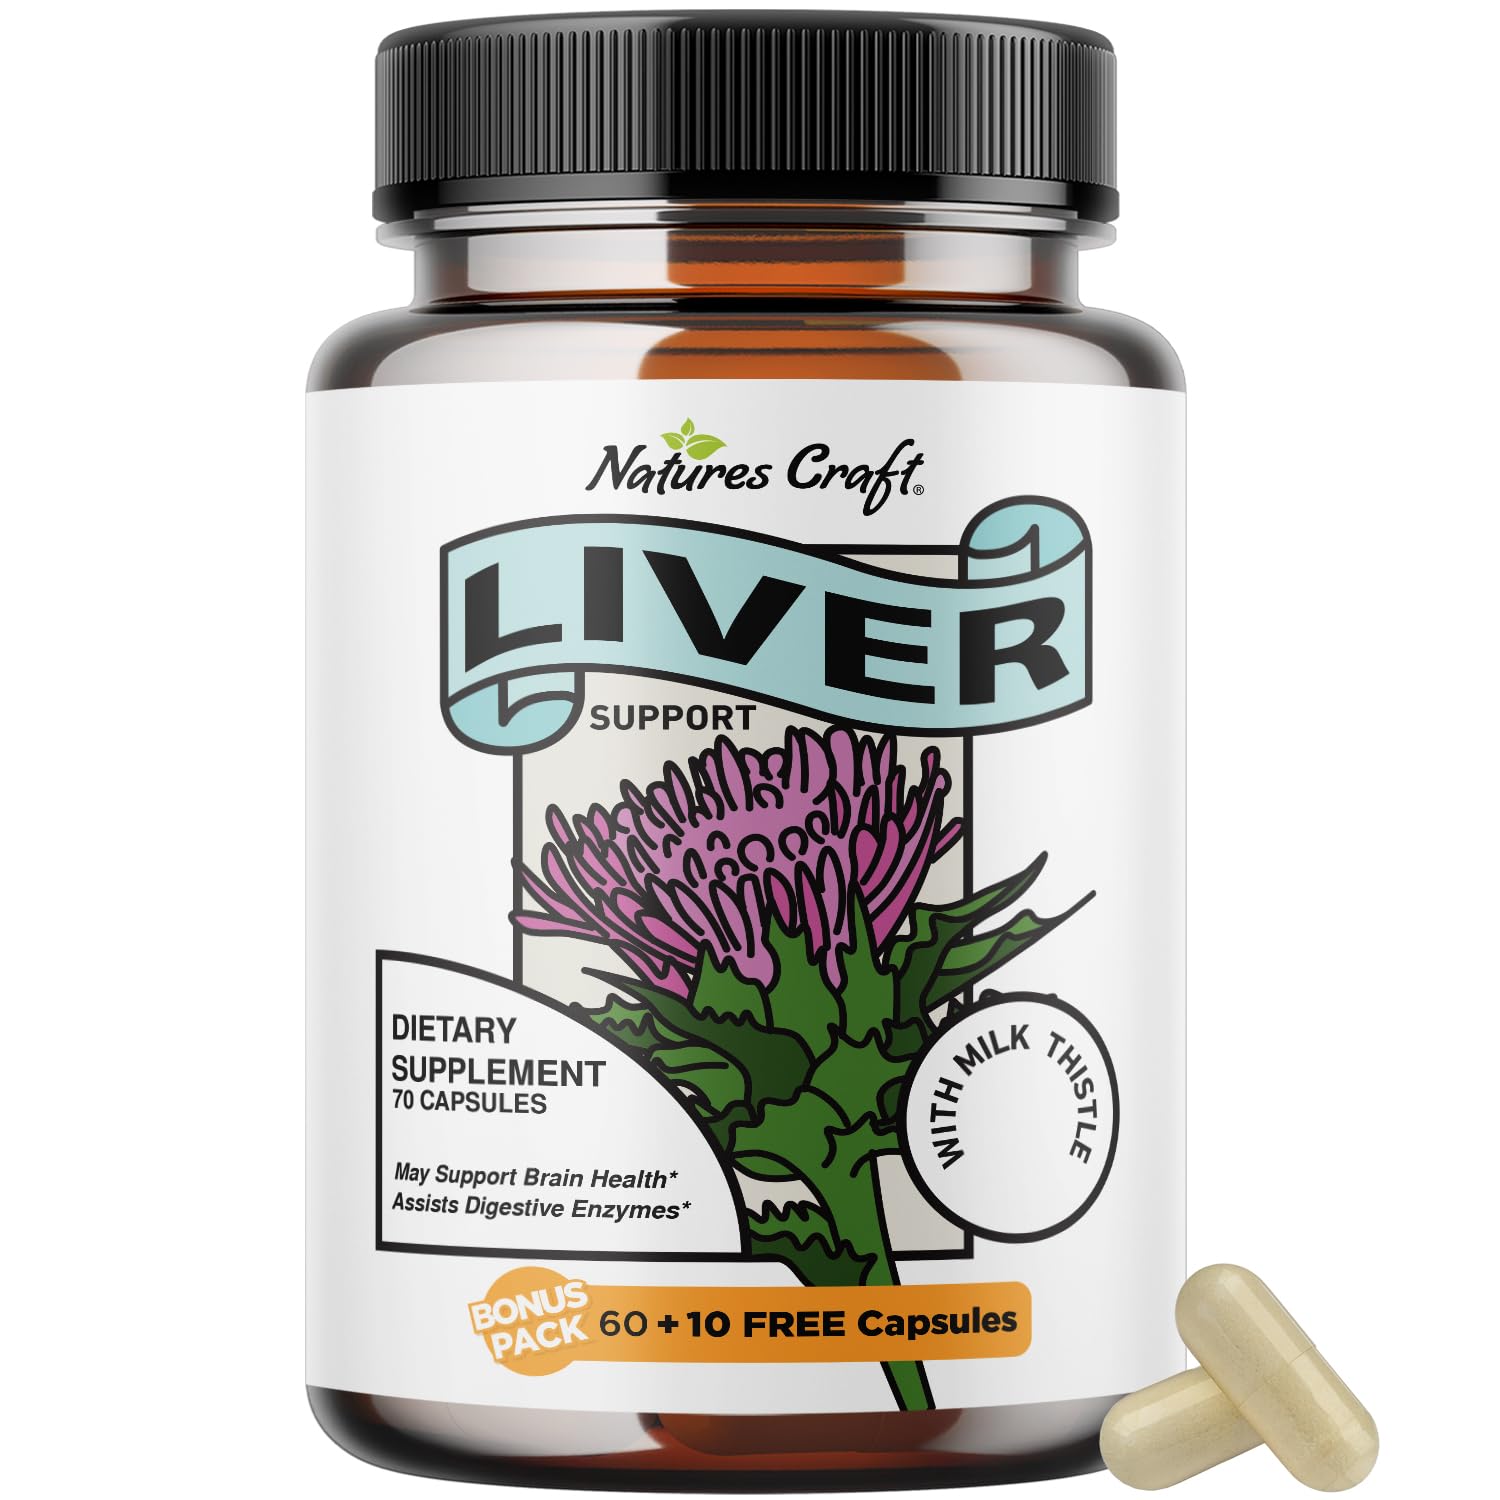 Liver Cleanse Detox & Repair Formula - Herbal Liver Support Supplement with Milk Thistle Dandelion Root Turmeric and Artichoke Extract for Liver Health - Silymarin Milk Thistle Liver Detox 70 Capsules